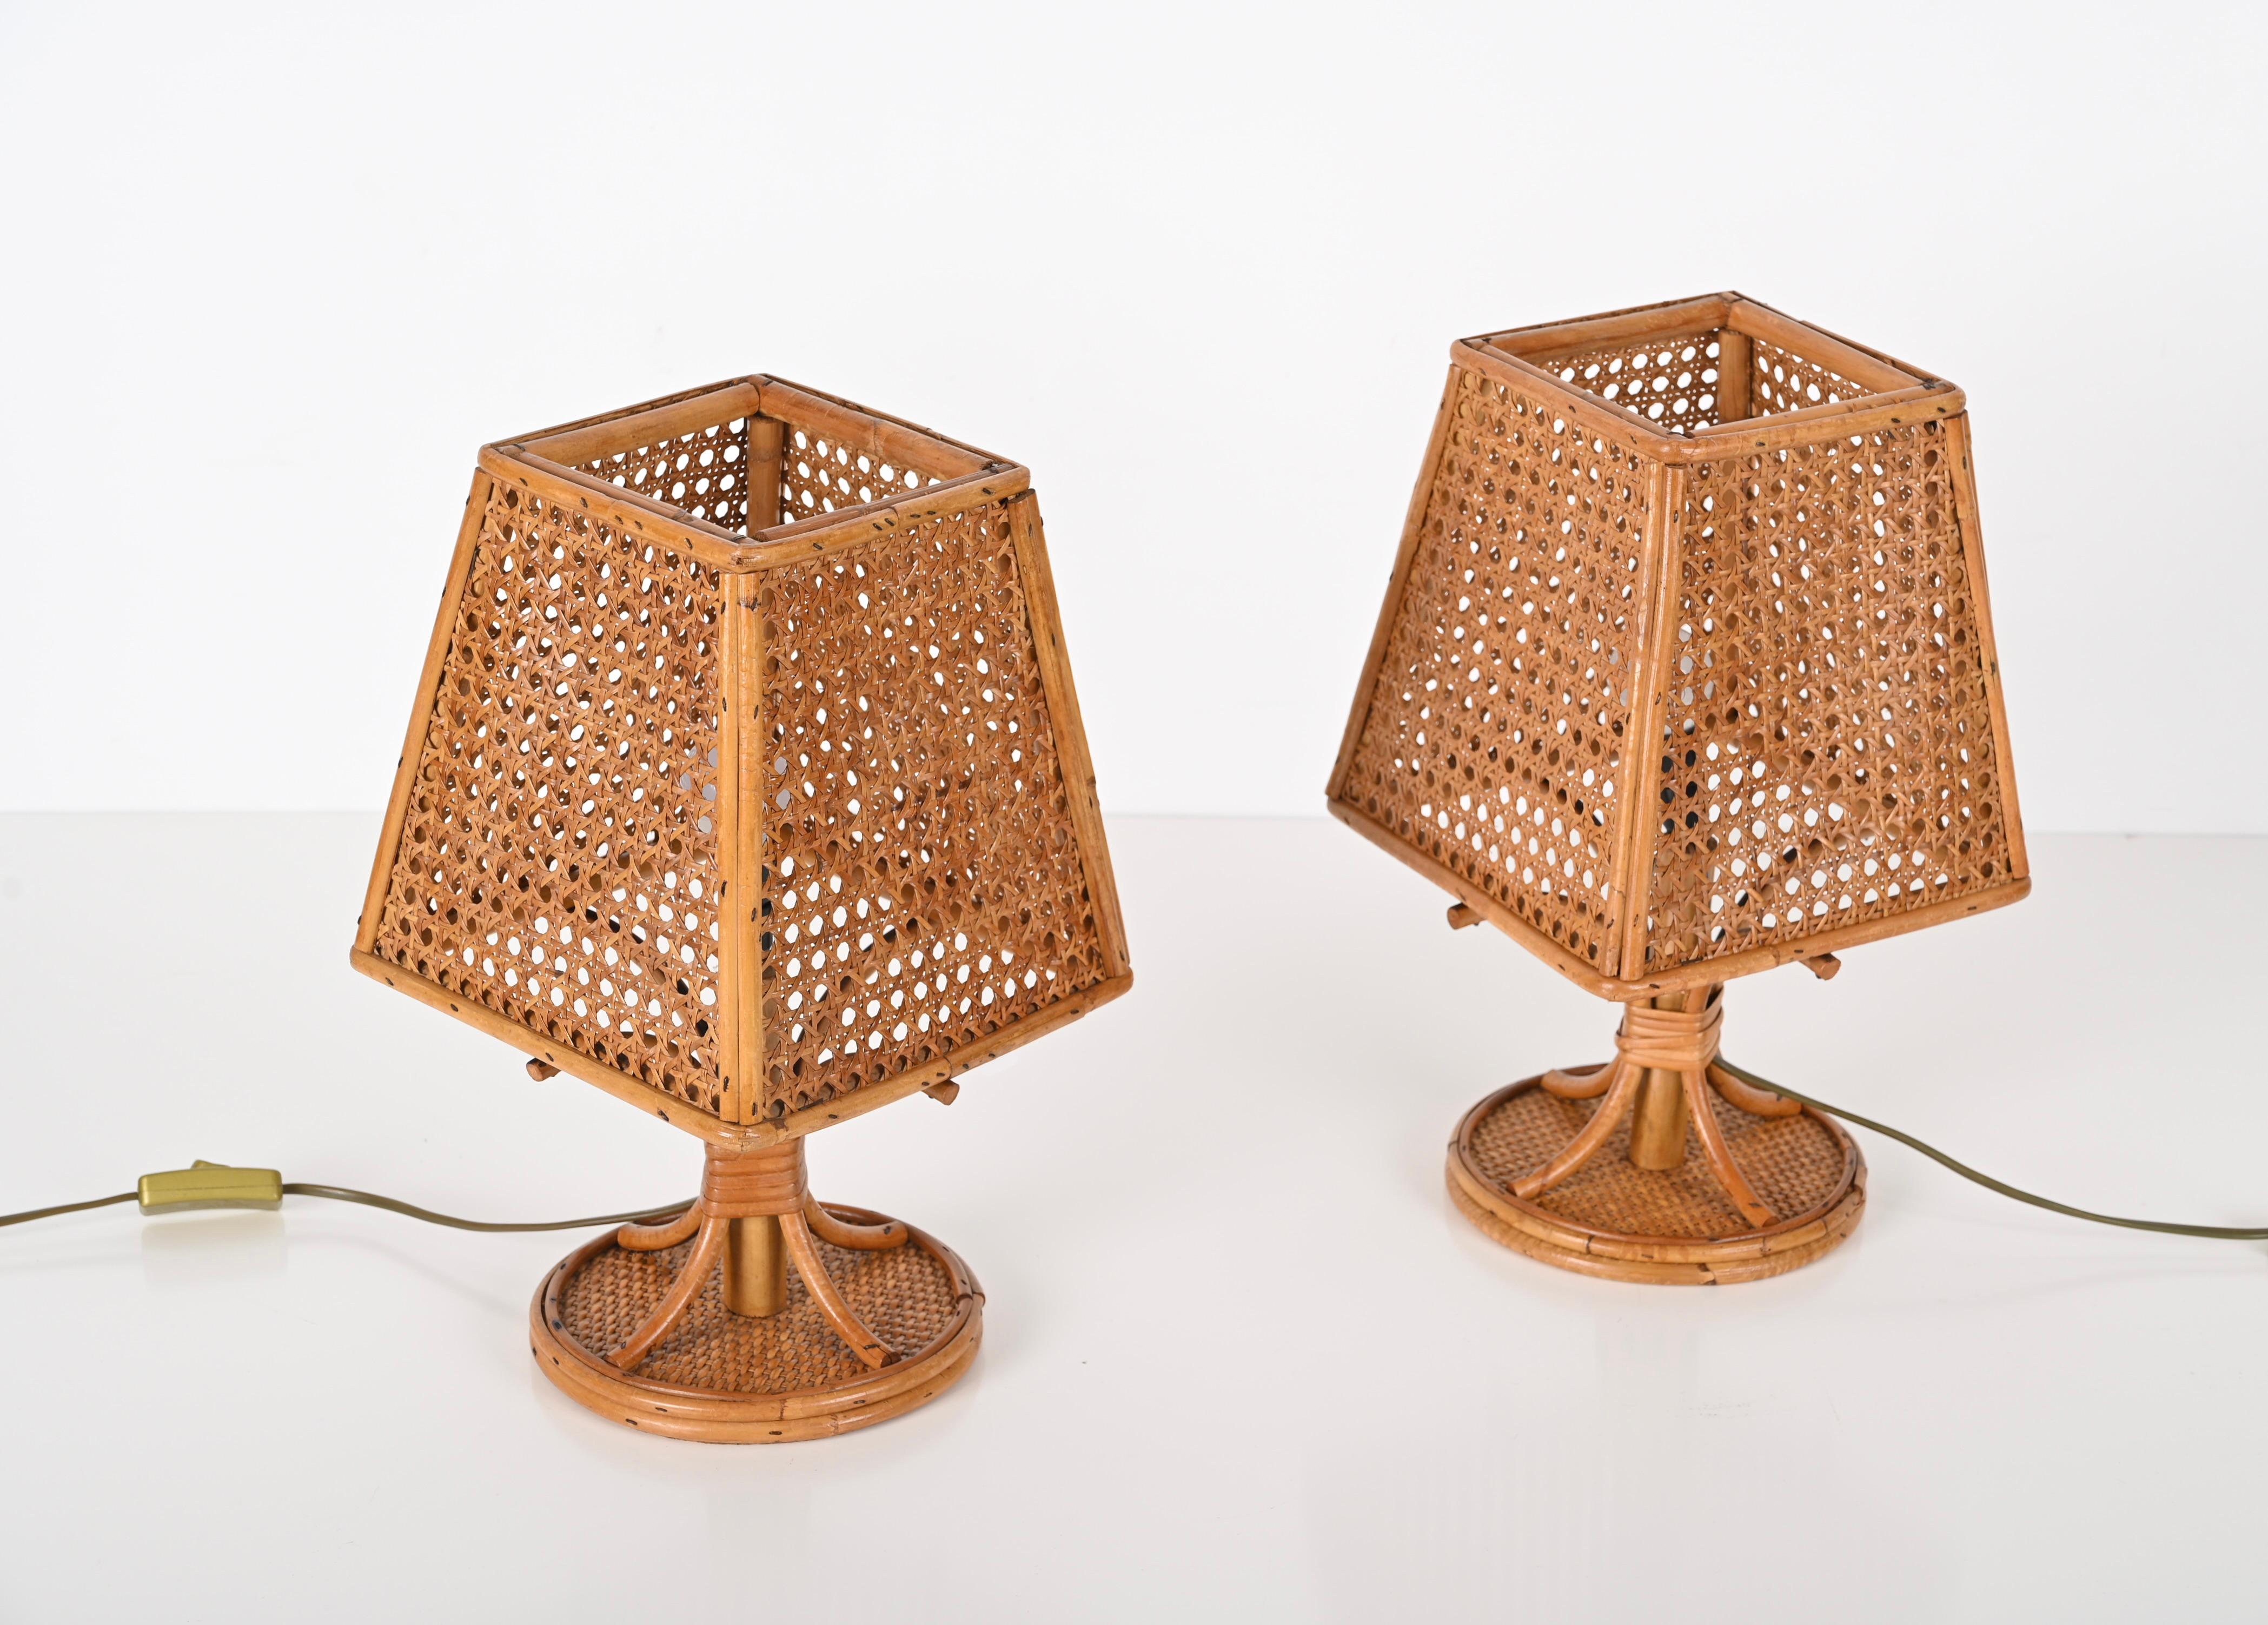 Pair of French Riviera Table Lamps in Wicker and Rattan, Italy 1960s For Sale 2